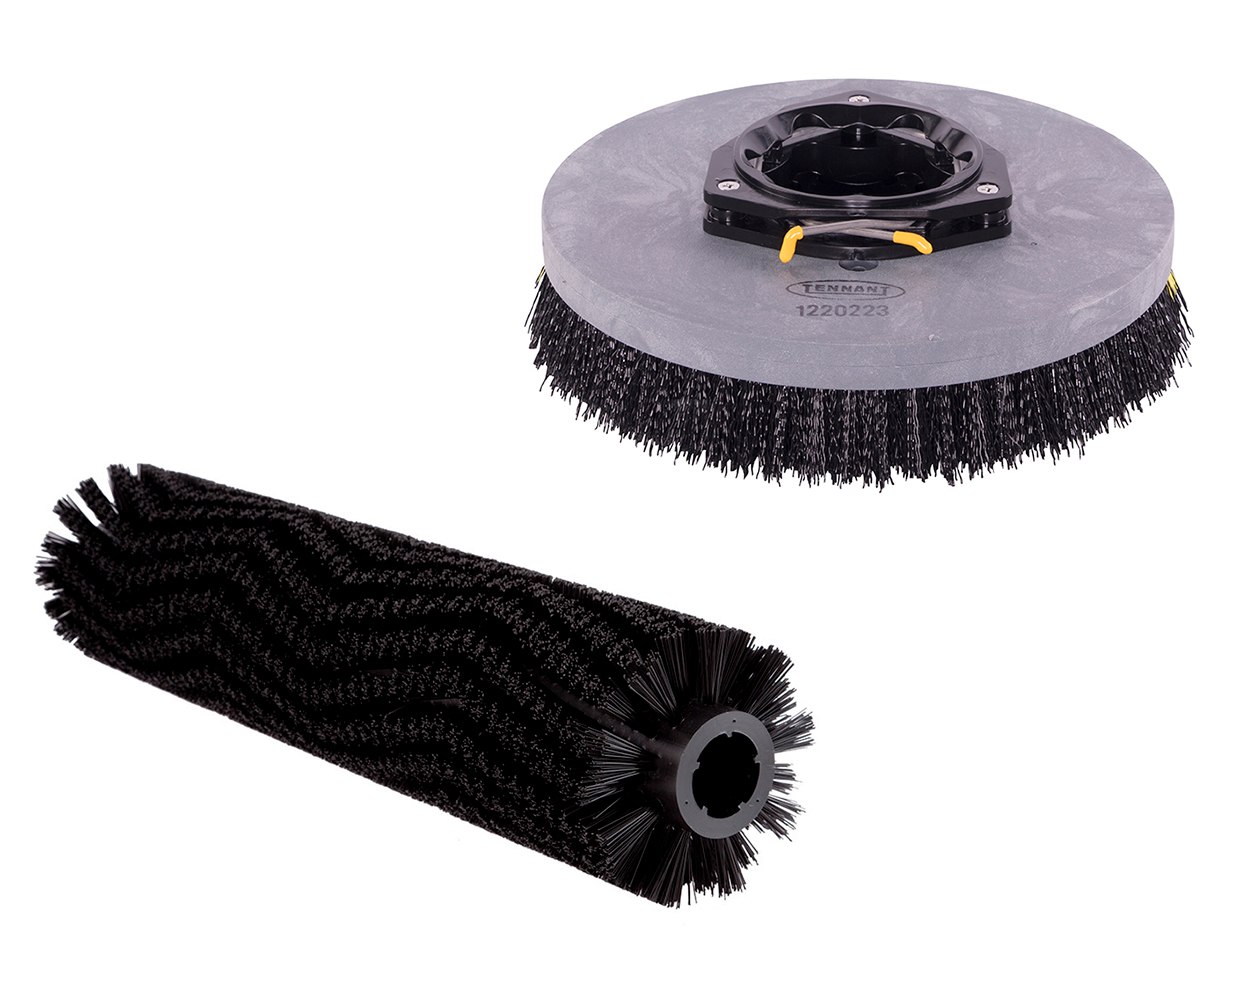 930839-5 Tennant 14 Round Cleaning, Scrubbing Rotary Brush for 28